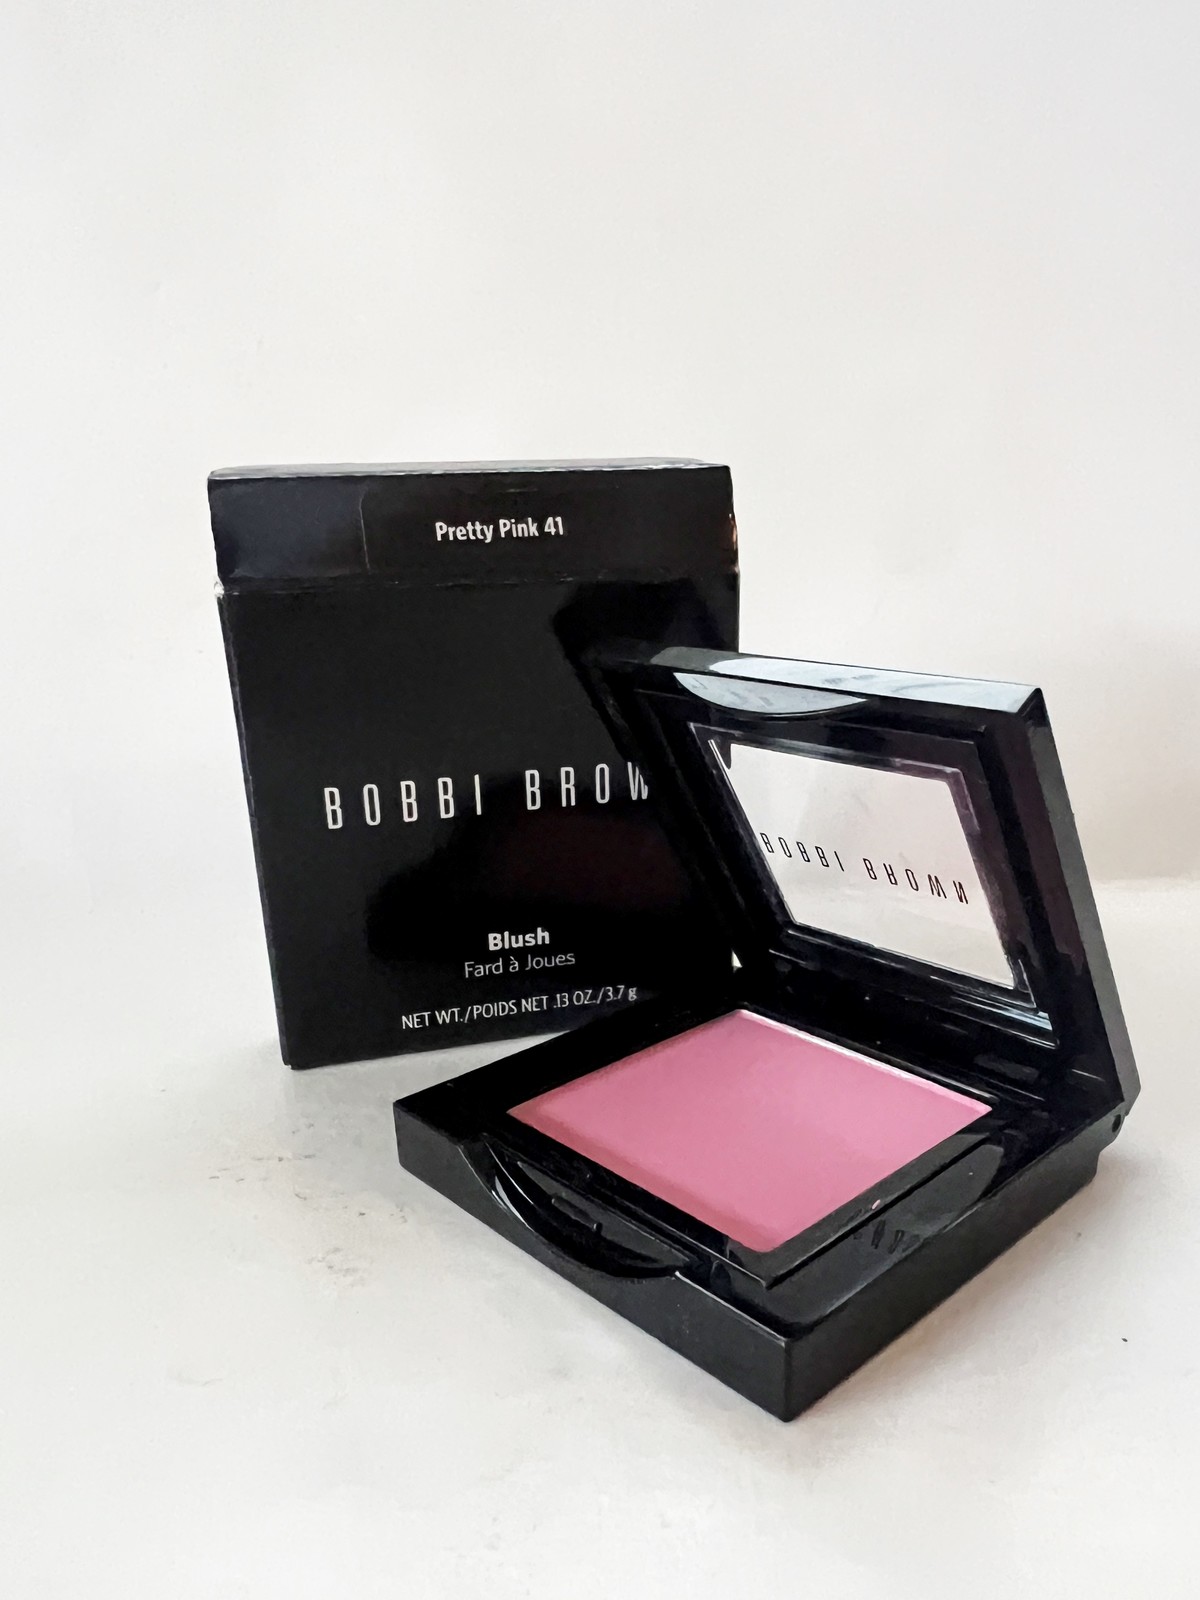 Primary image for Bobbi Brown Blush Shade "Pretty Pink 41" 0.13oz Boxed